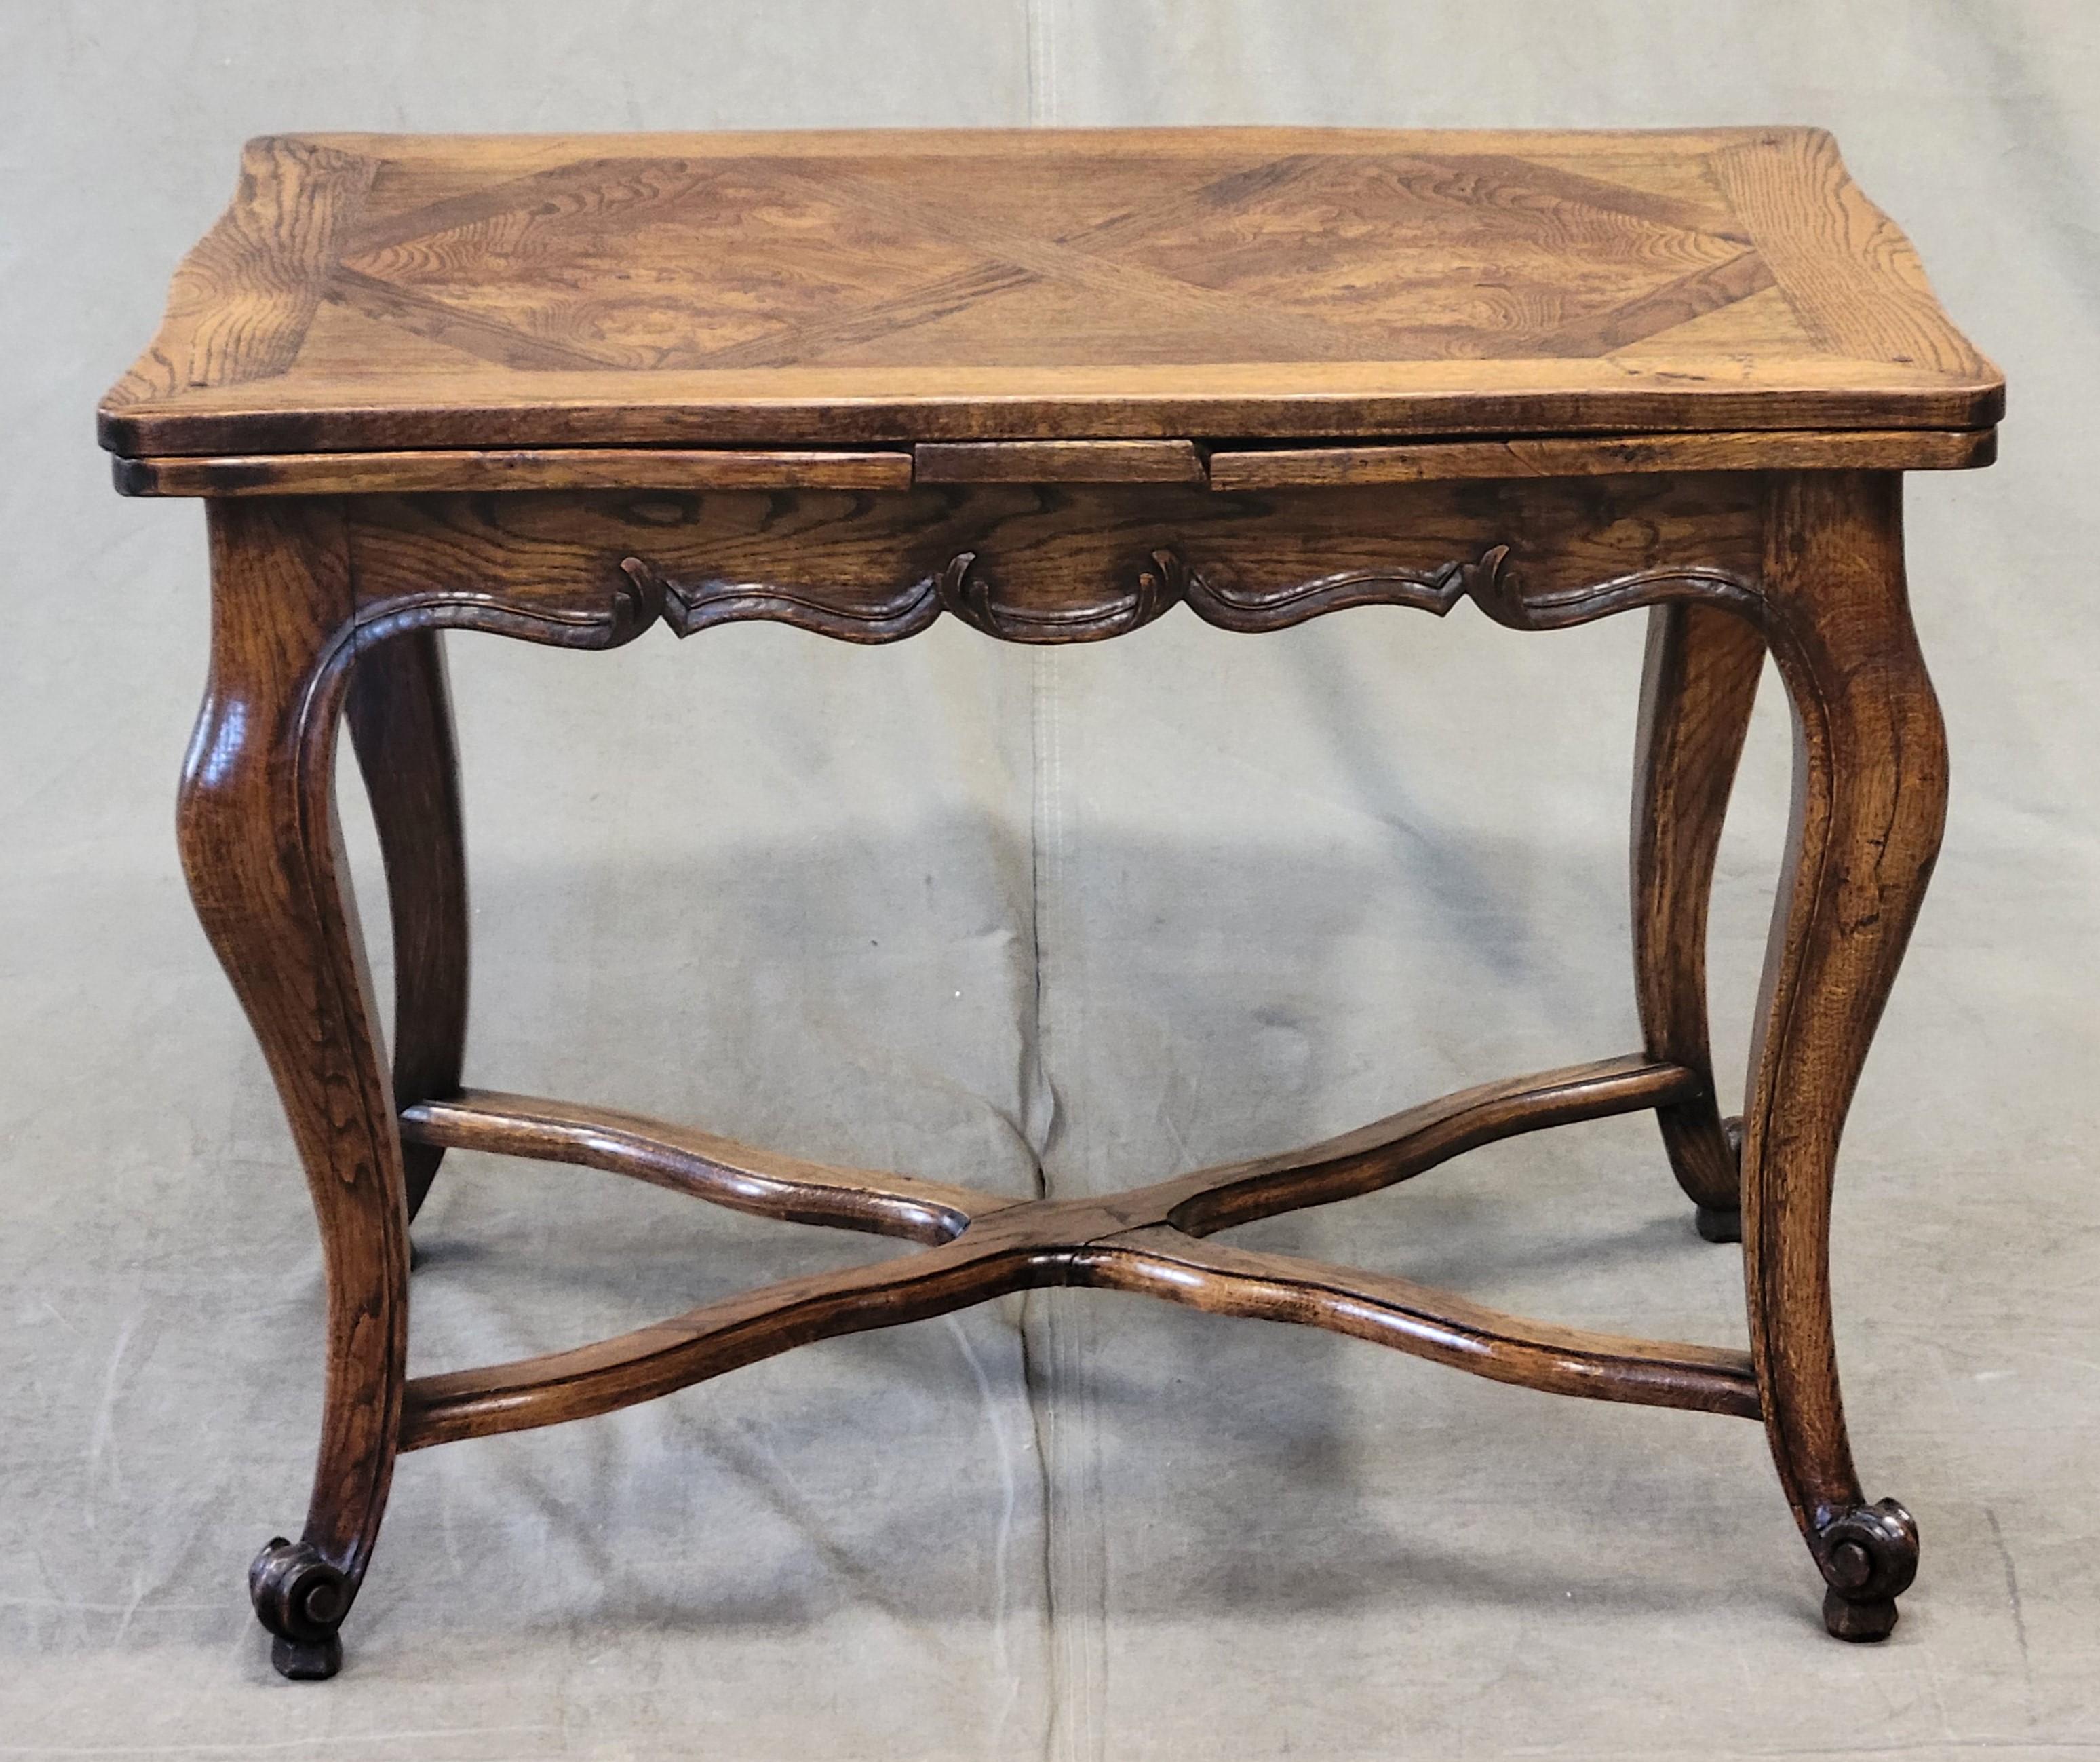 A gorgeous antique French draw leaf table with a solid elm frame and burl elm parquetry top. Leaves have been adjusted and pull out smoothly. The table easily transitions from a petite 39